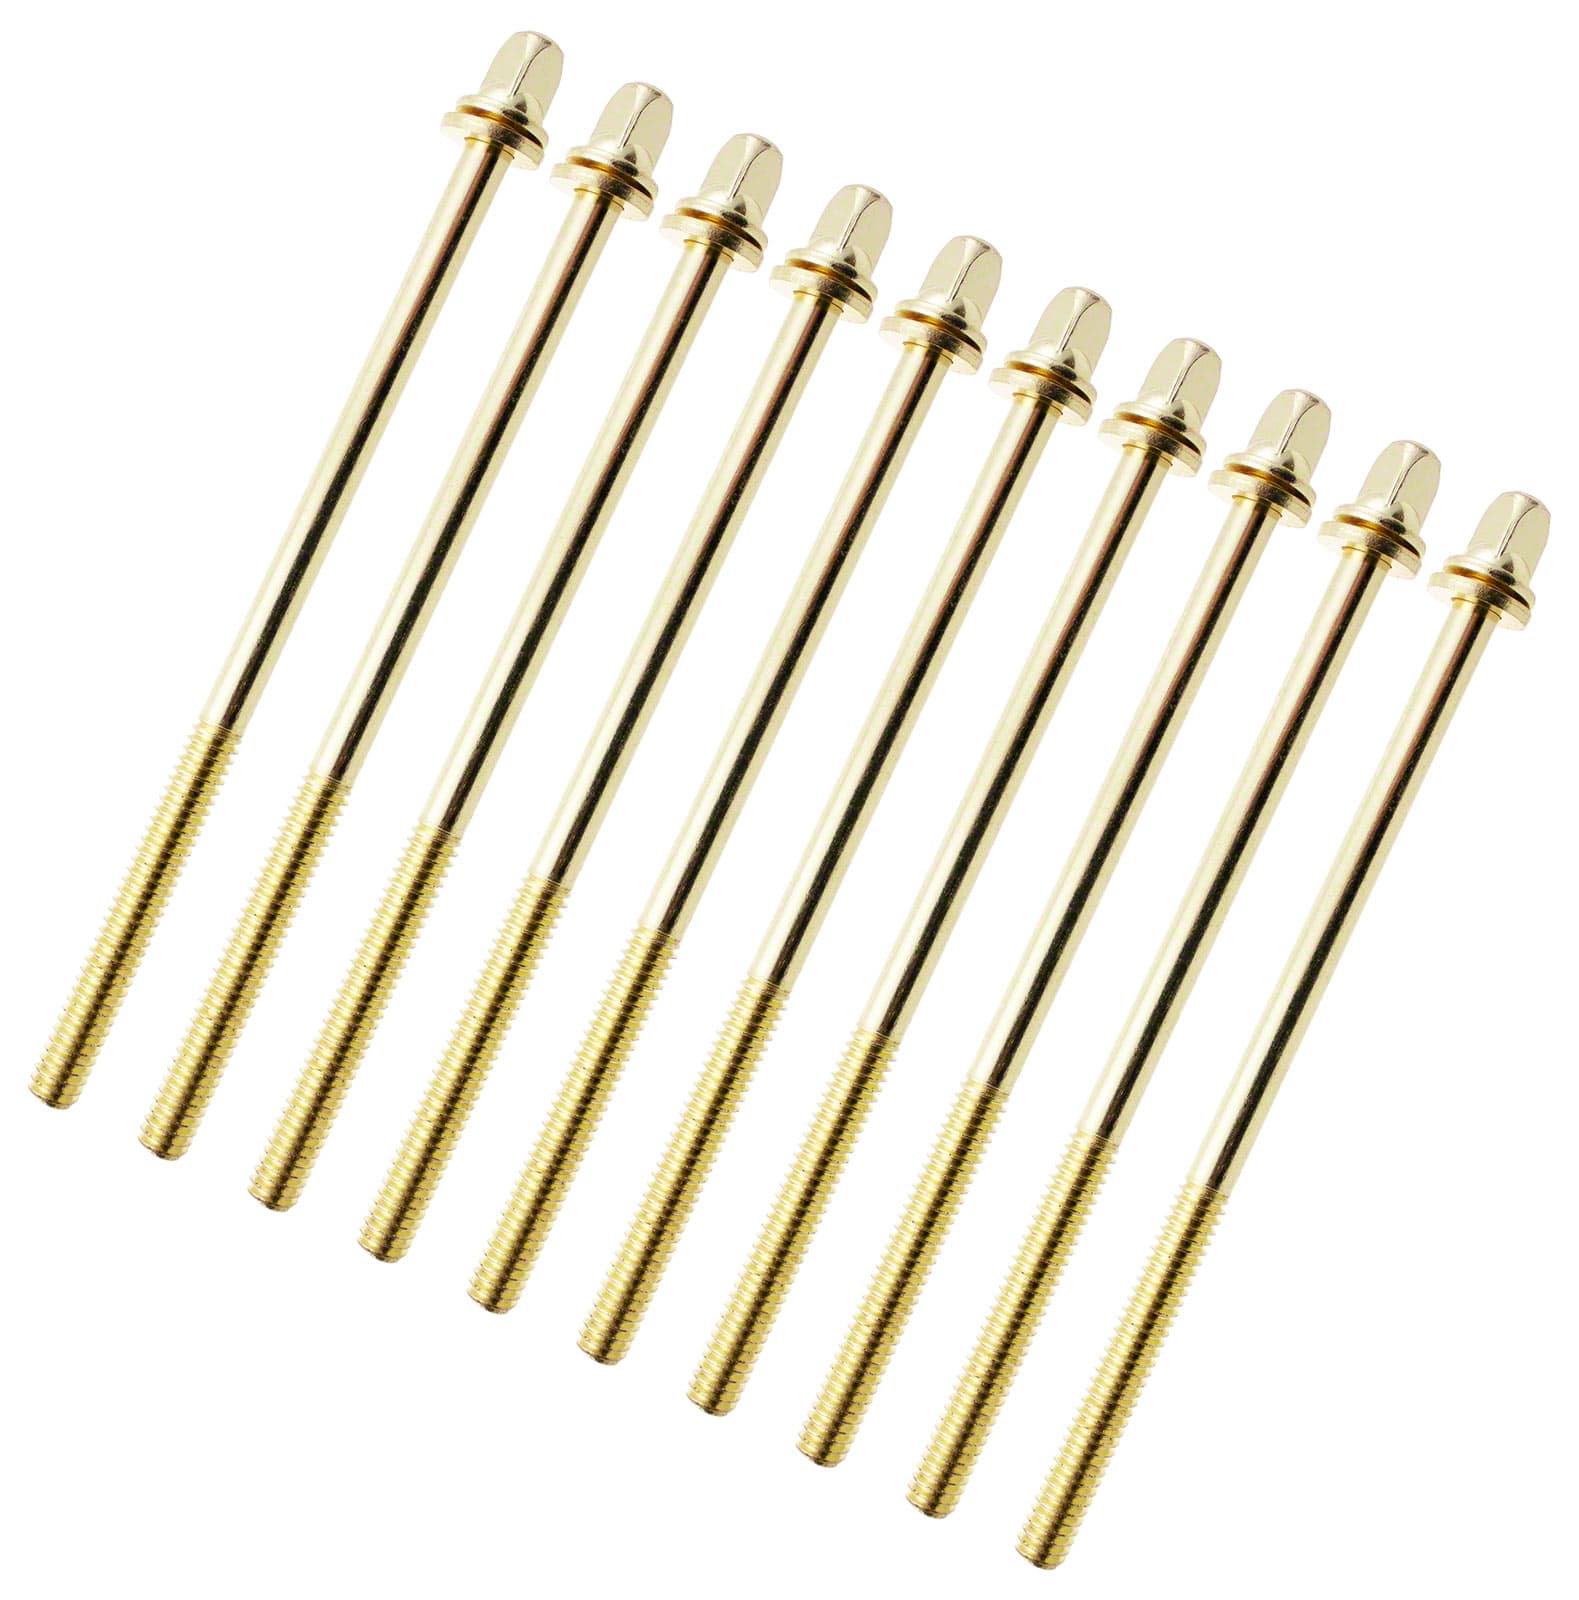 SPAREDRUM TRC-102W-BR - 102MM TENSION ROD BRASS WITH WASHER - 7/32